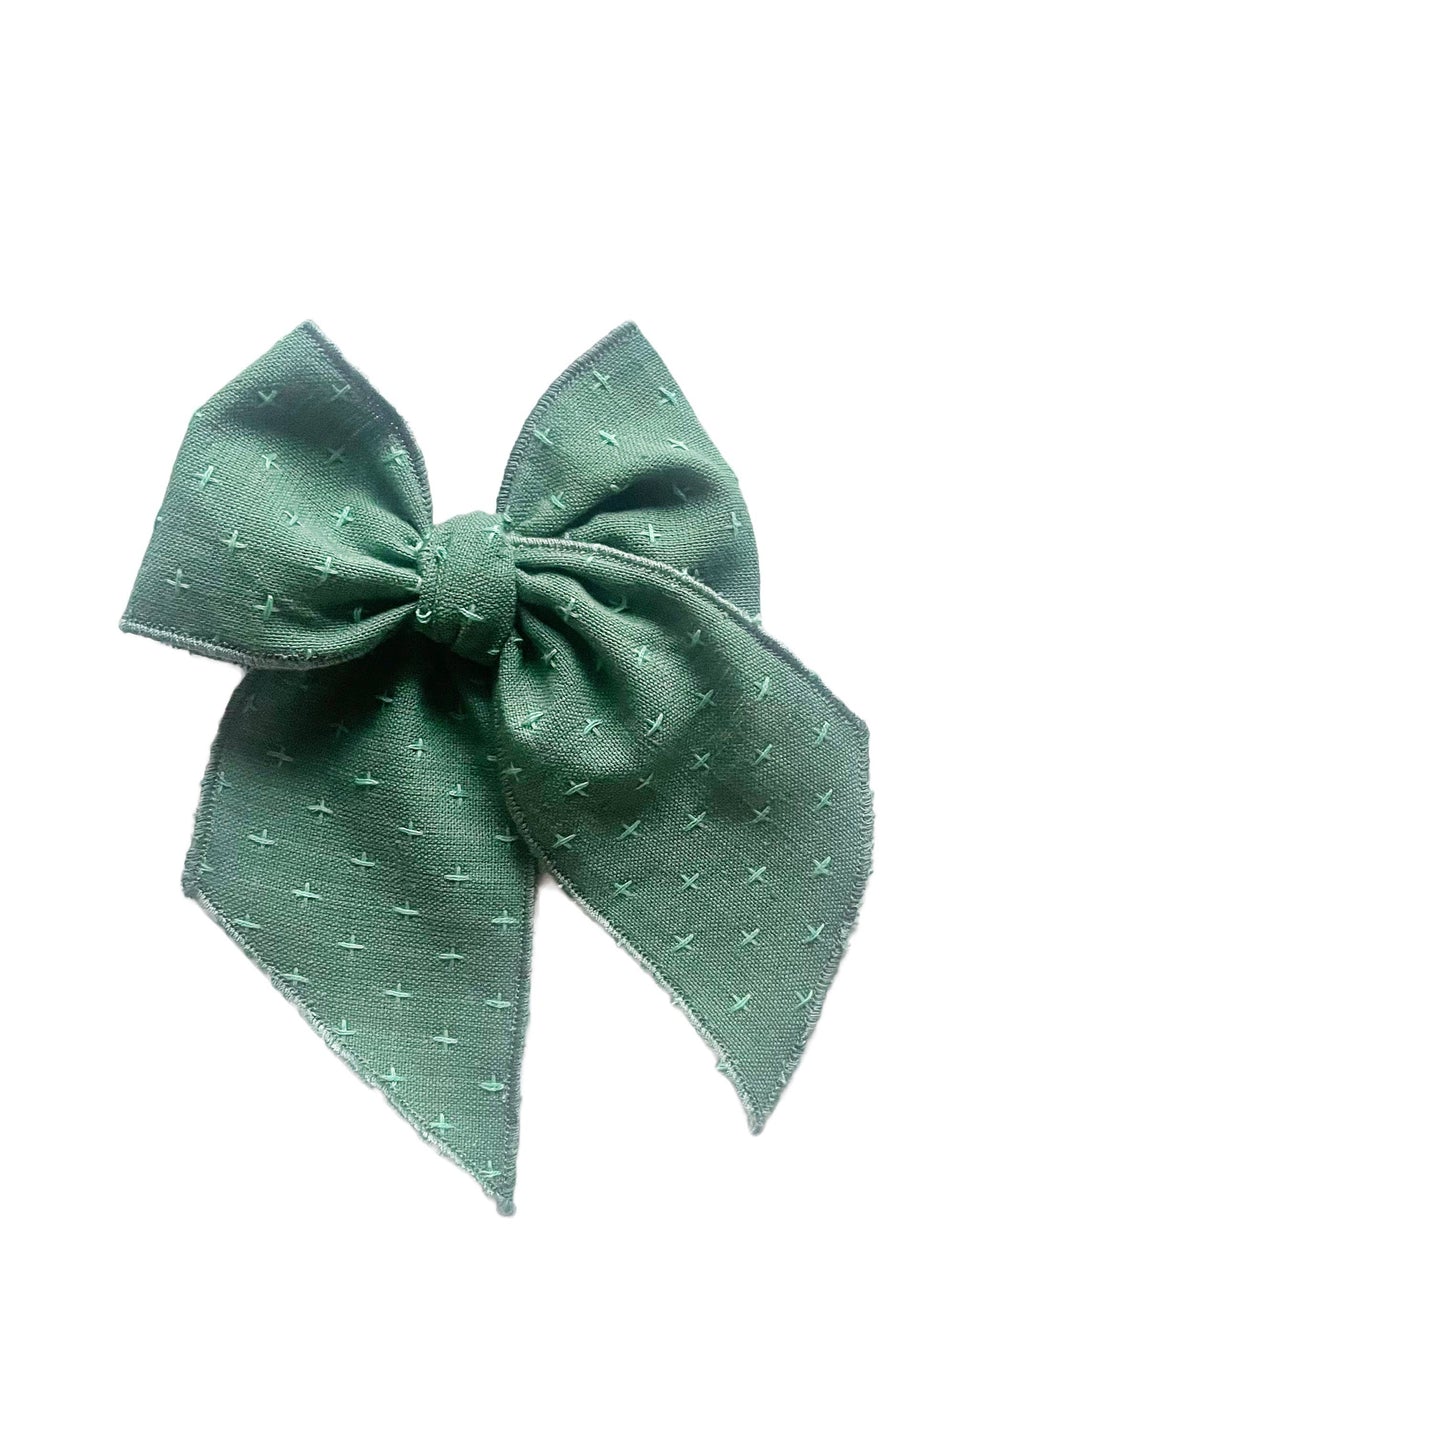 Evergreen Cross Stitched Bow